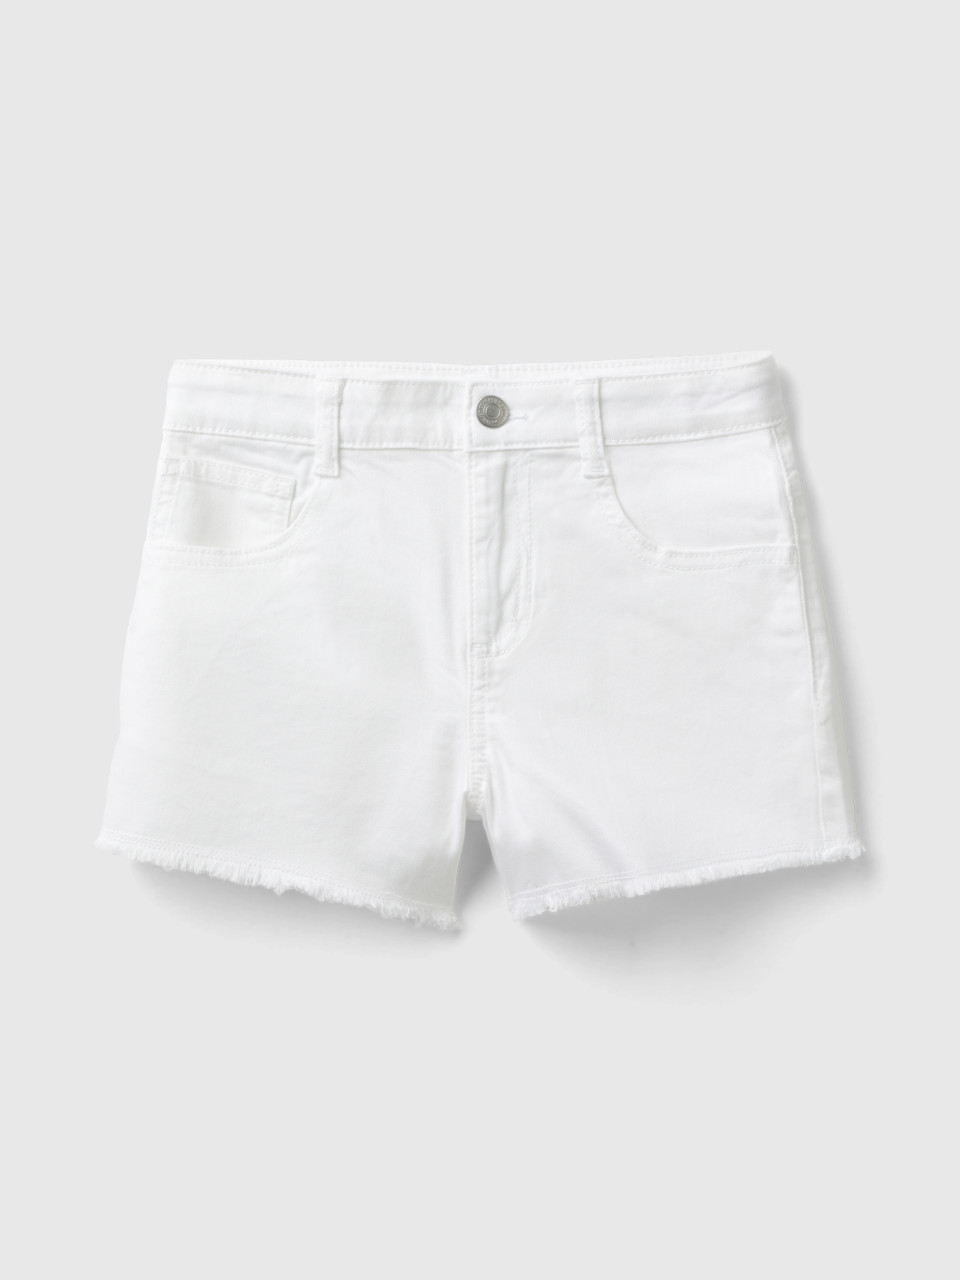 Benetton, Frayed Shorts In Stretch Cotton, White, Kids